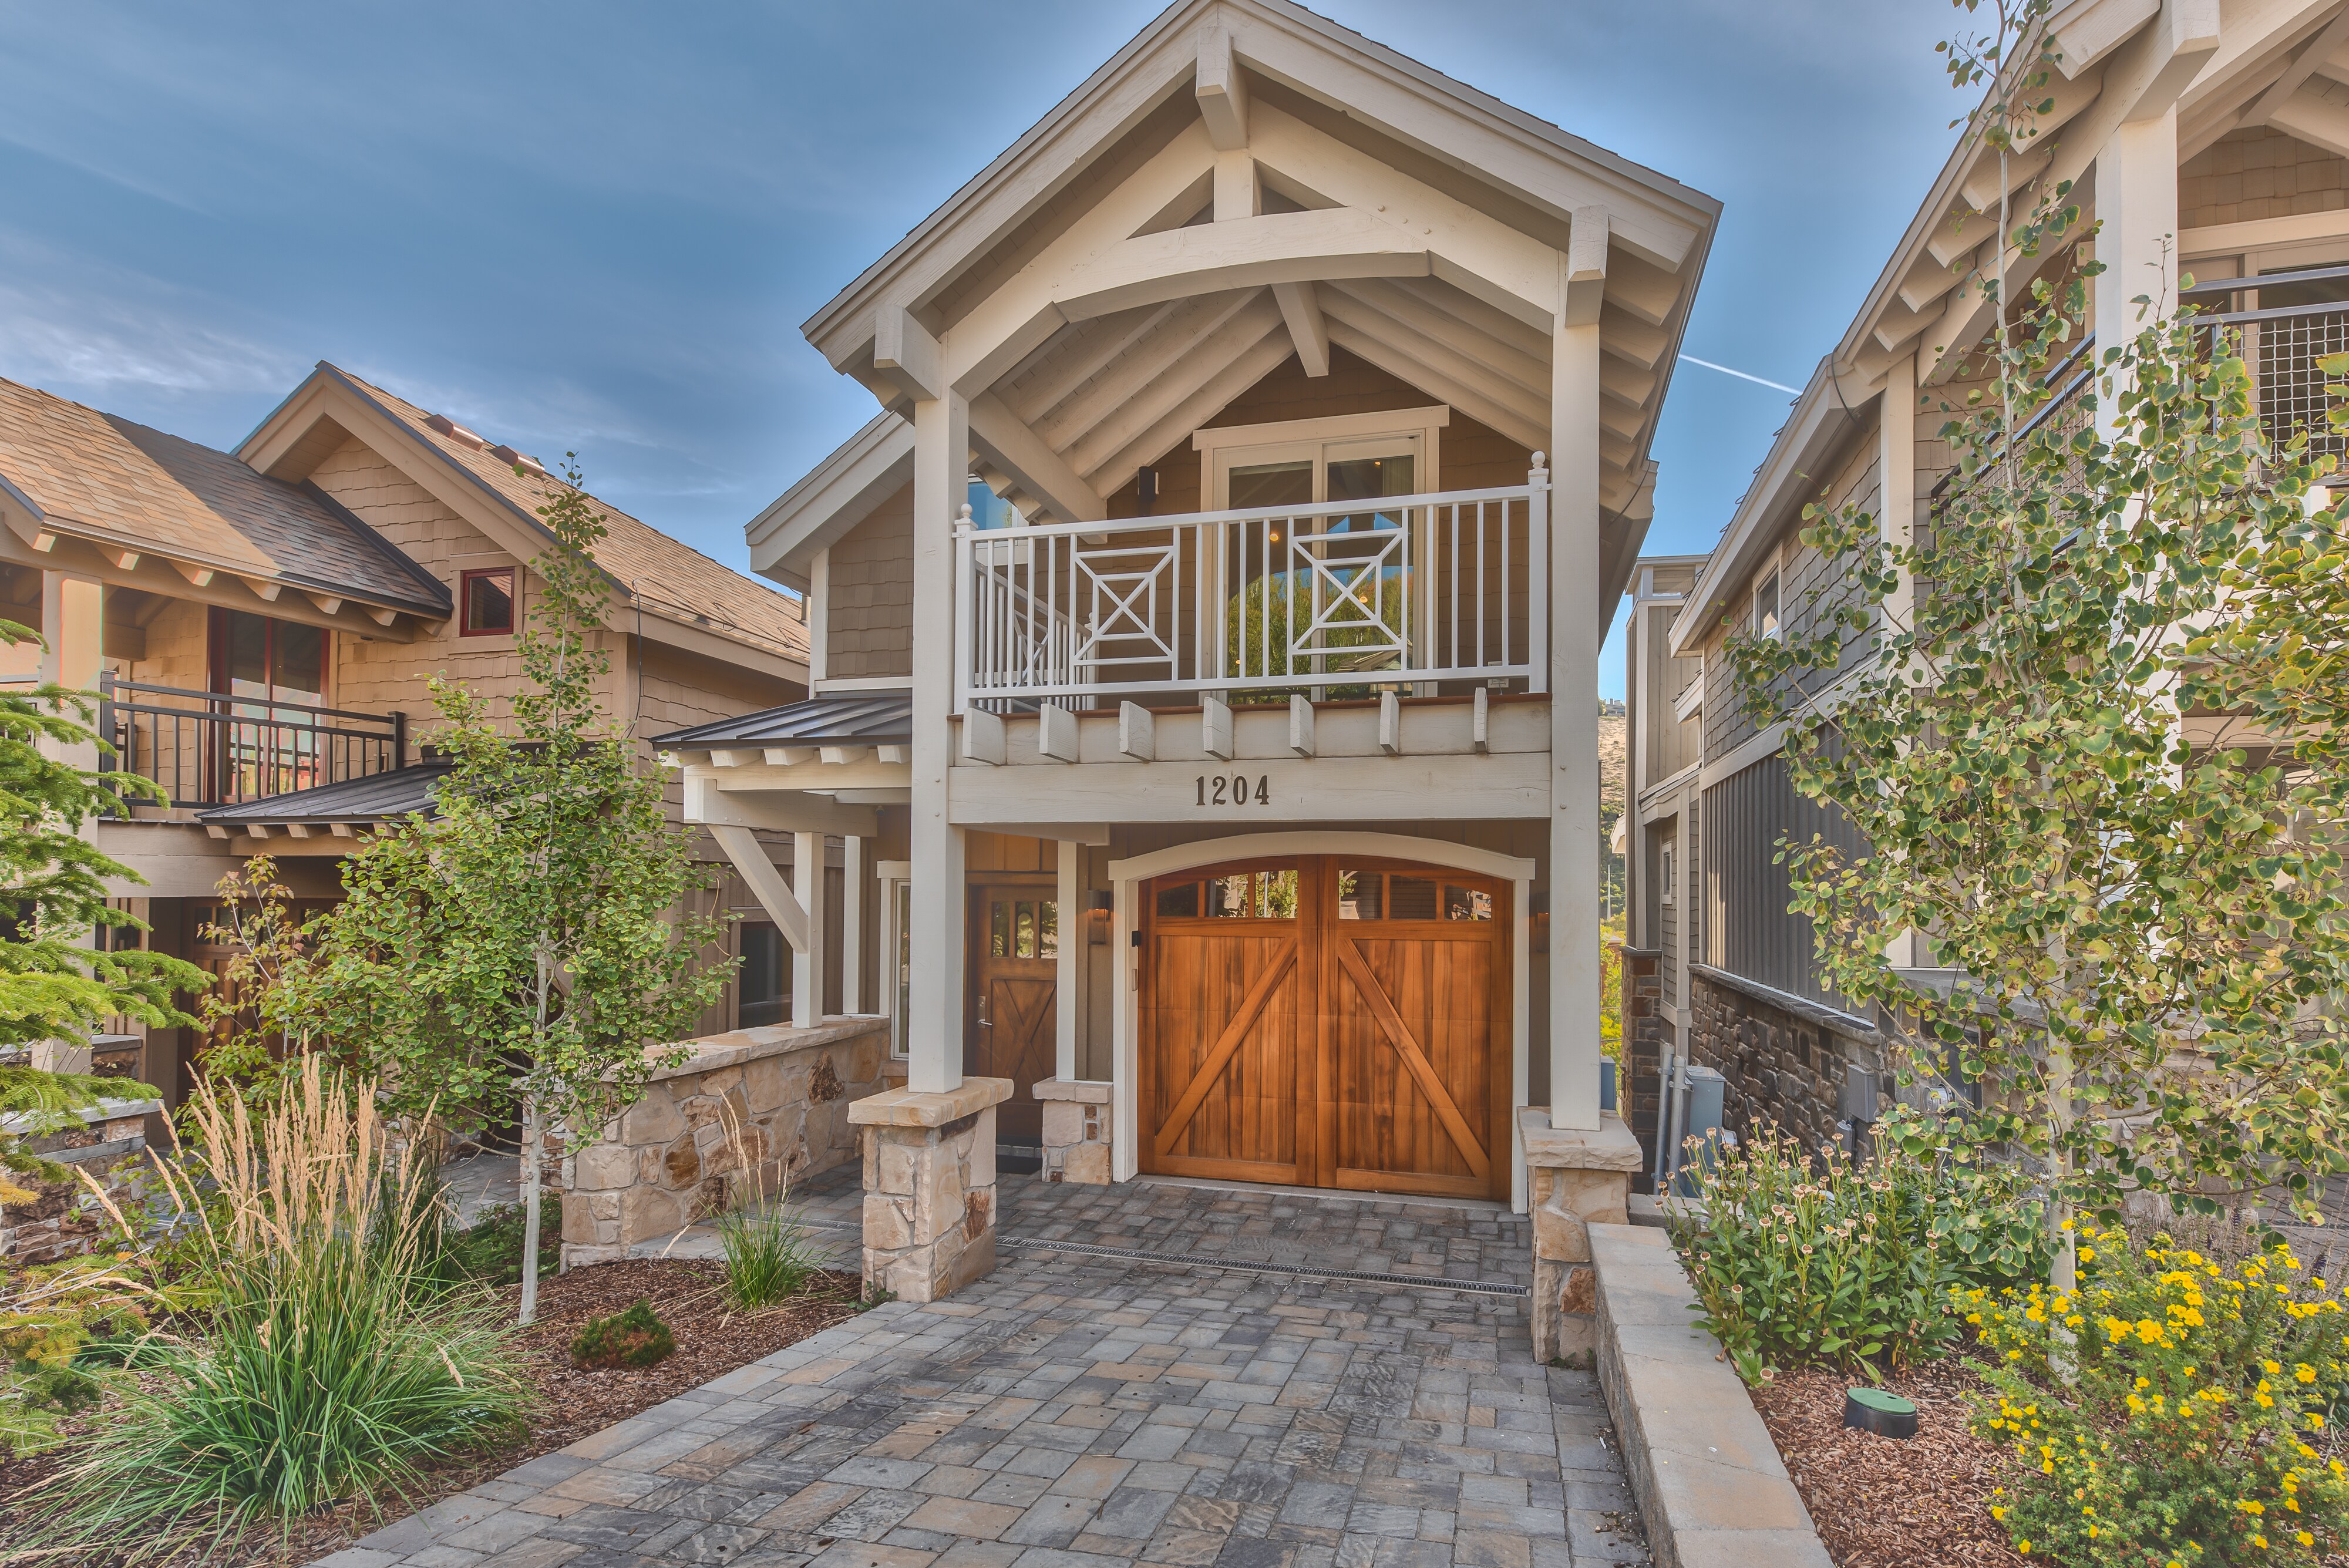 Park City Empire Dream - Newly Built 4 Bedrooms / 4.5 Bath with Hot Tub